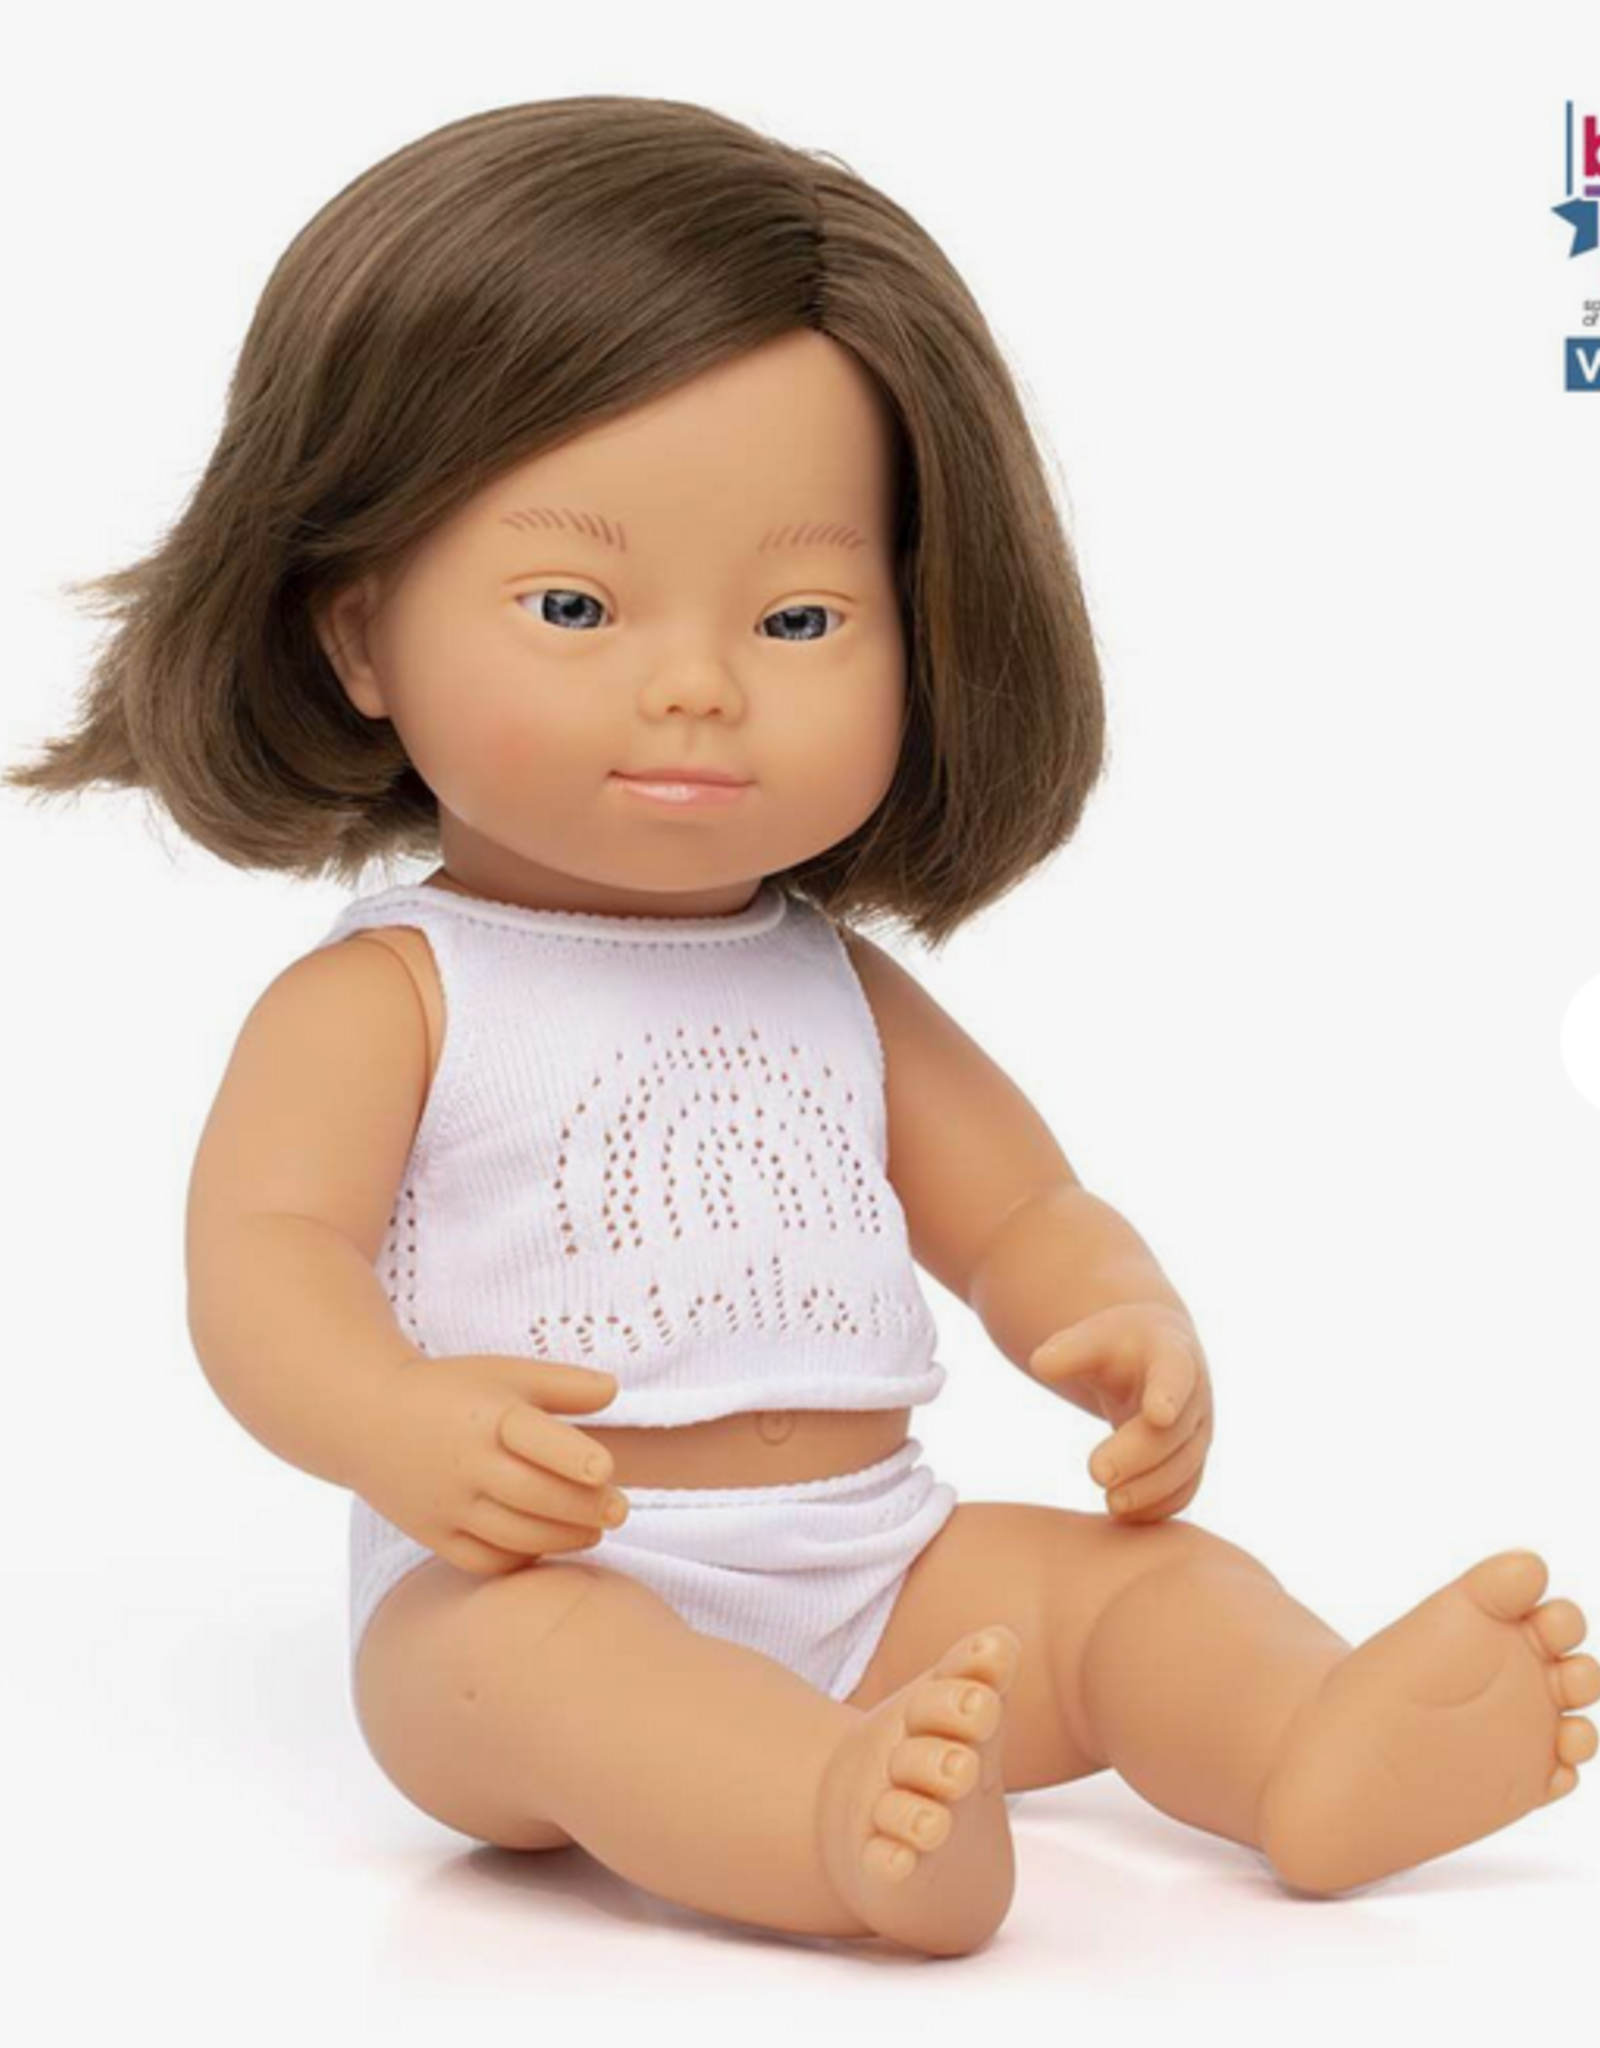 Miniland Baby Doll Caucasian Girl with  Down Syndrome 15”